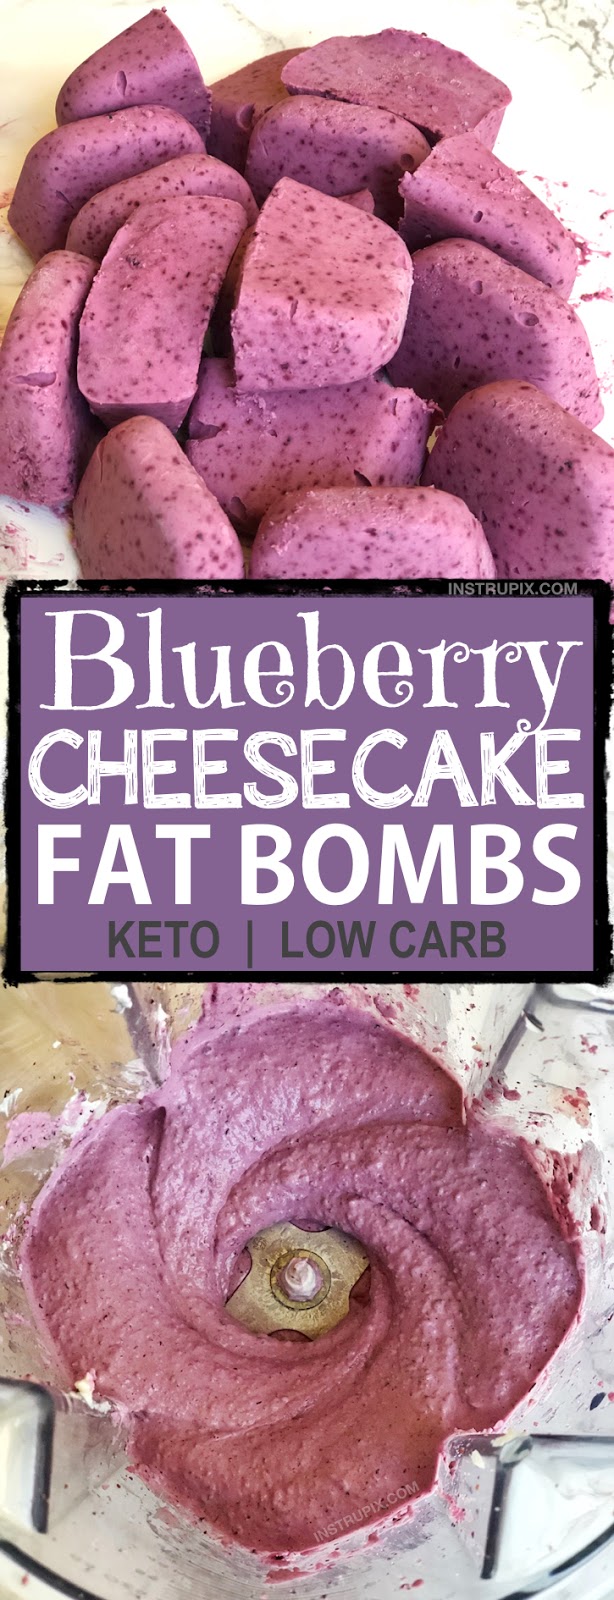  Easy Blueberry Cheesecake Fat Bombs